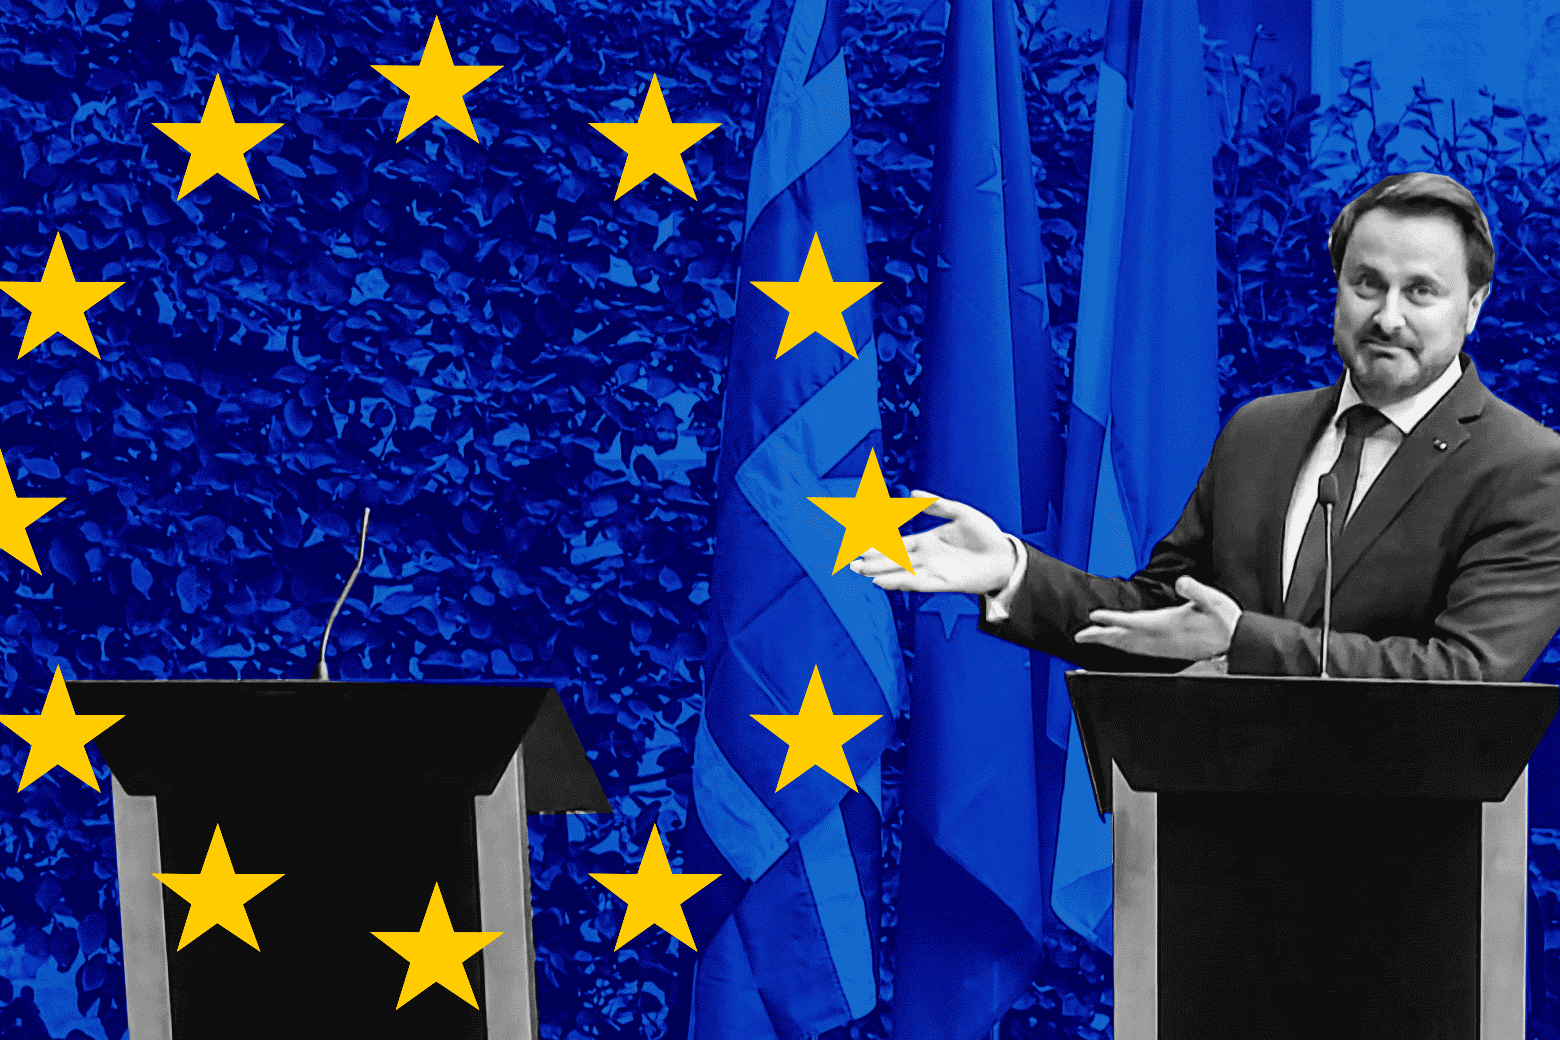 In this video grab taken from AFP TV footage on September 16, 2019, Luxembourg's Prime Minister Xavier Bettel gestures to an empty podium as he speaks to the press after a meeting with the British Prime Minister, EU Commission President and officials in Luxembourg.